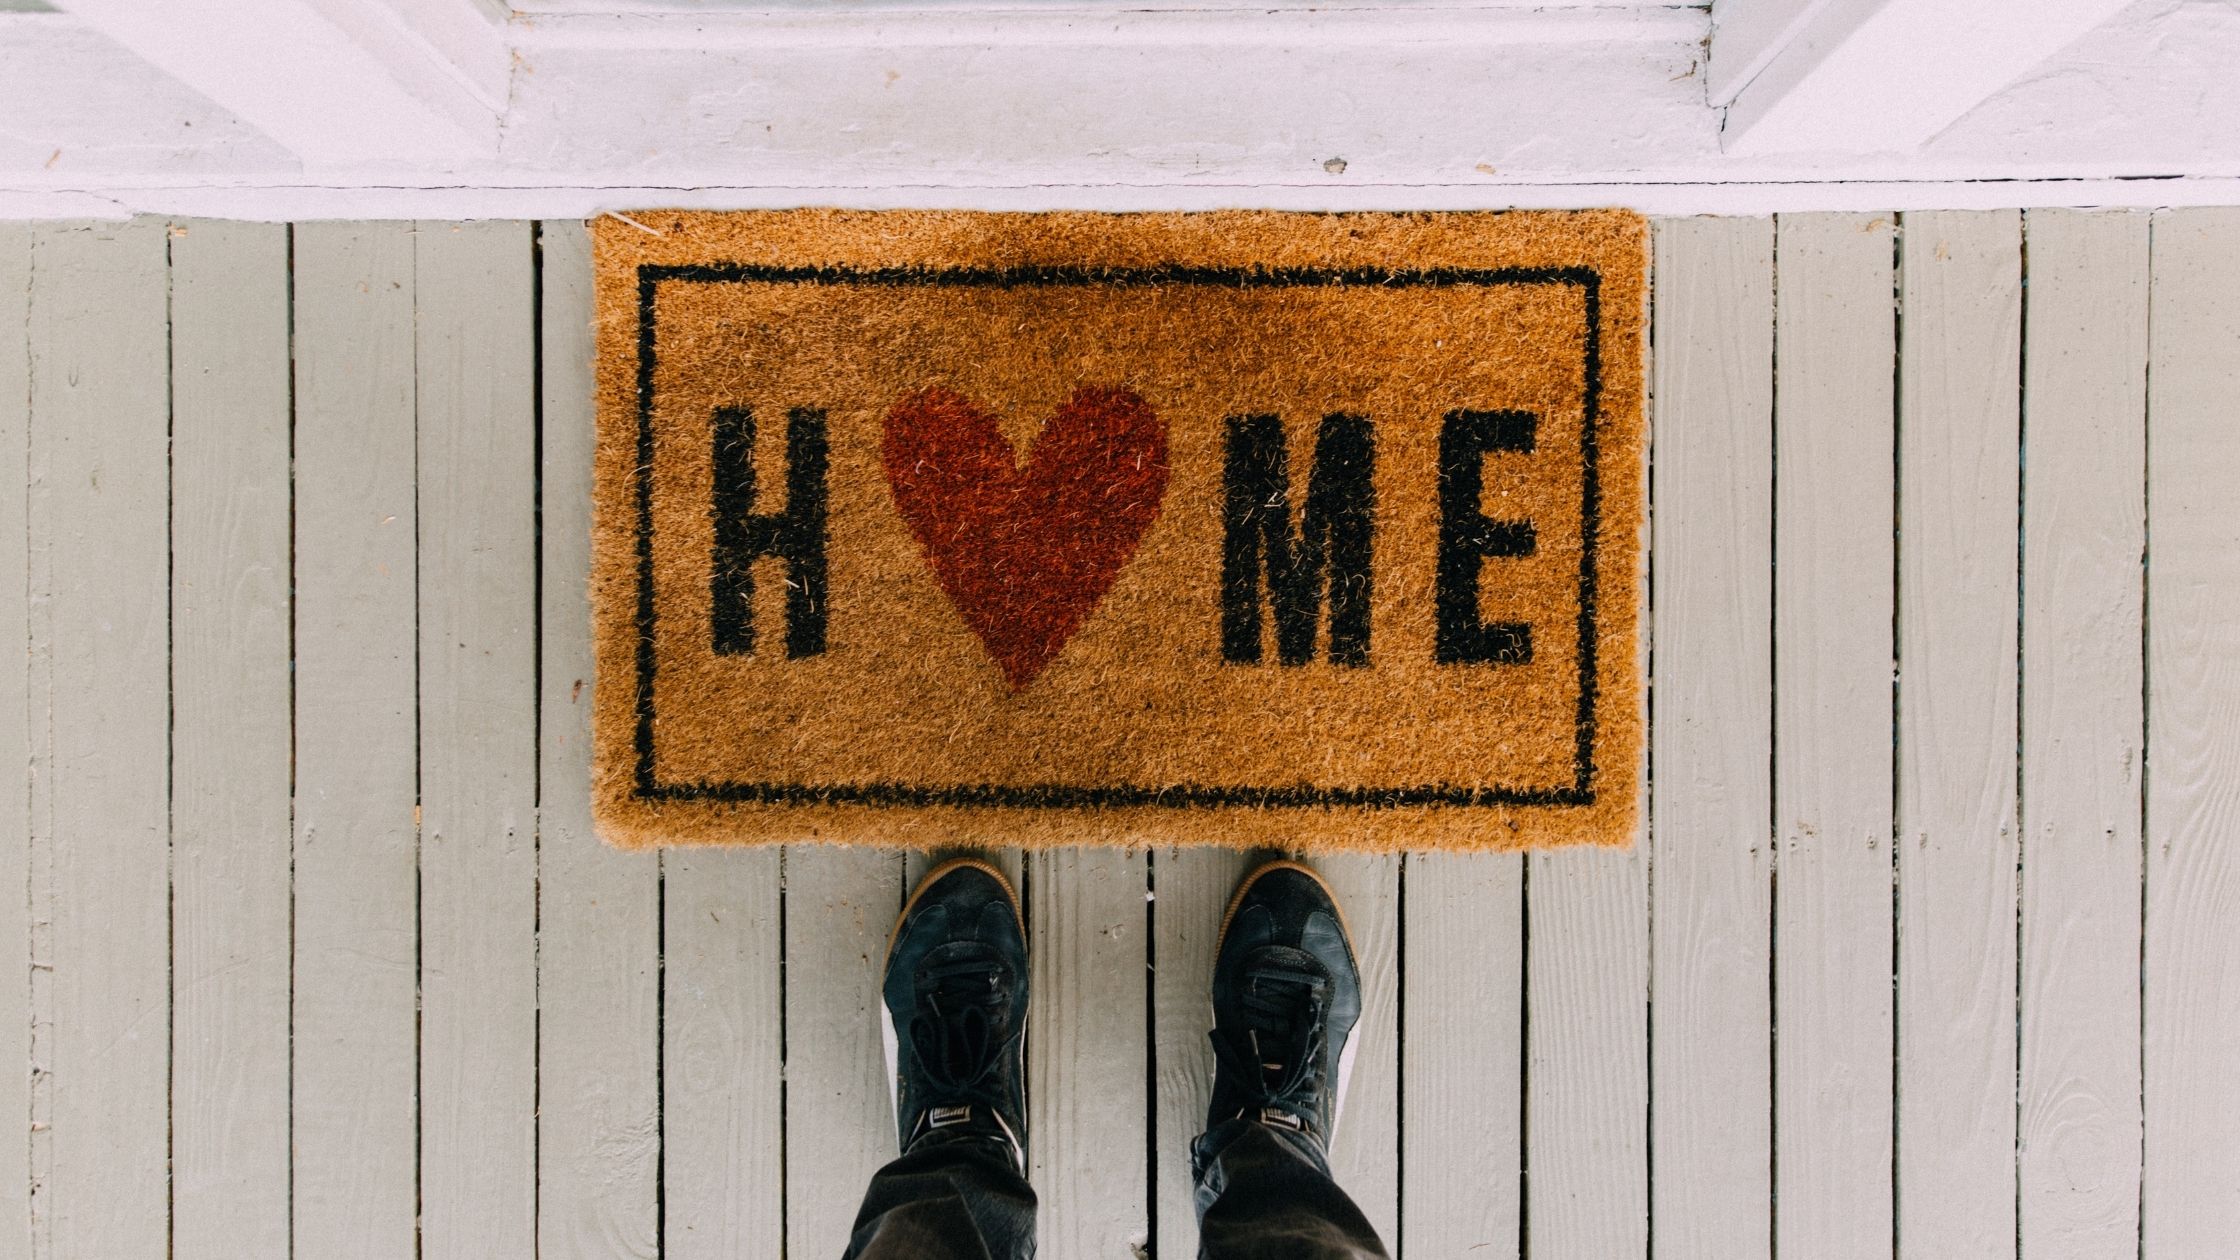 A home mat at the front door.